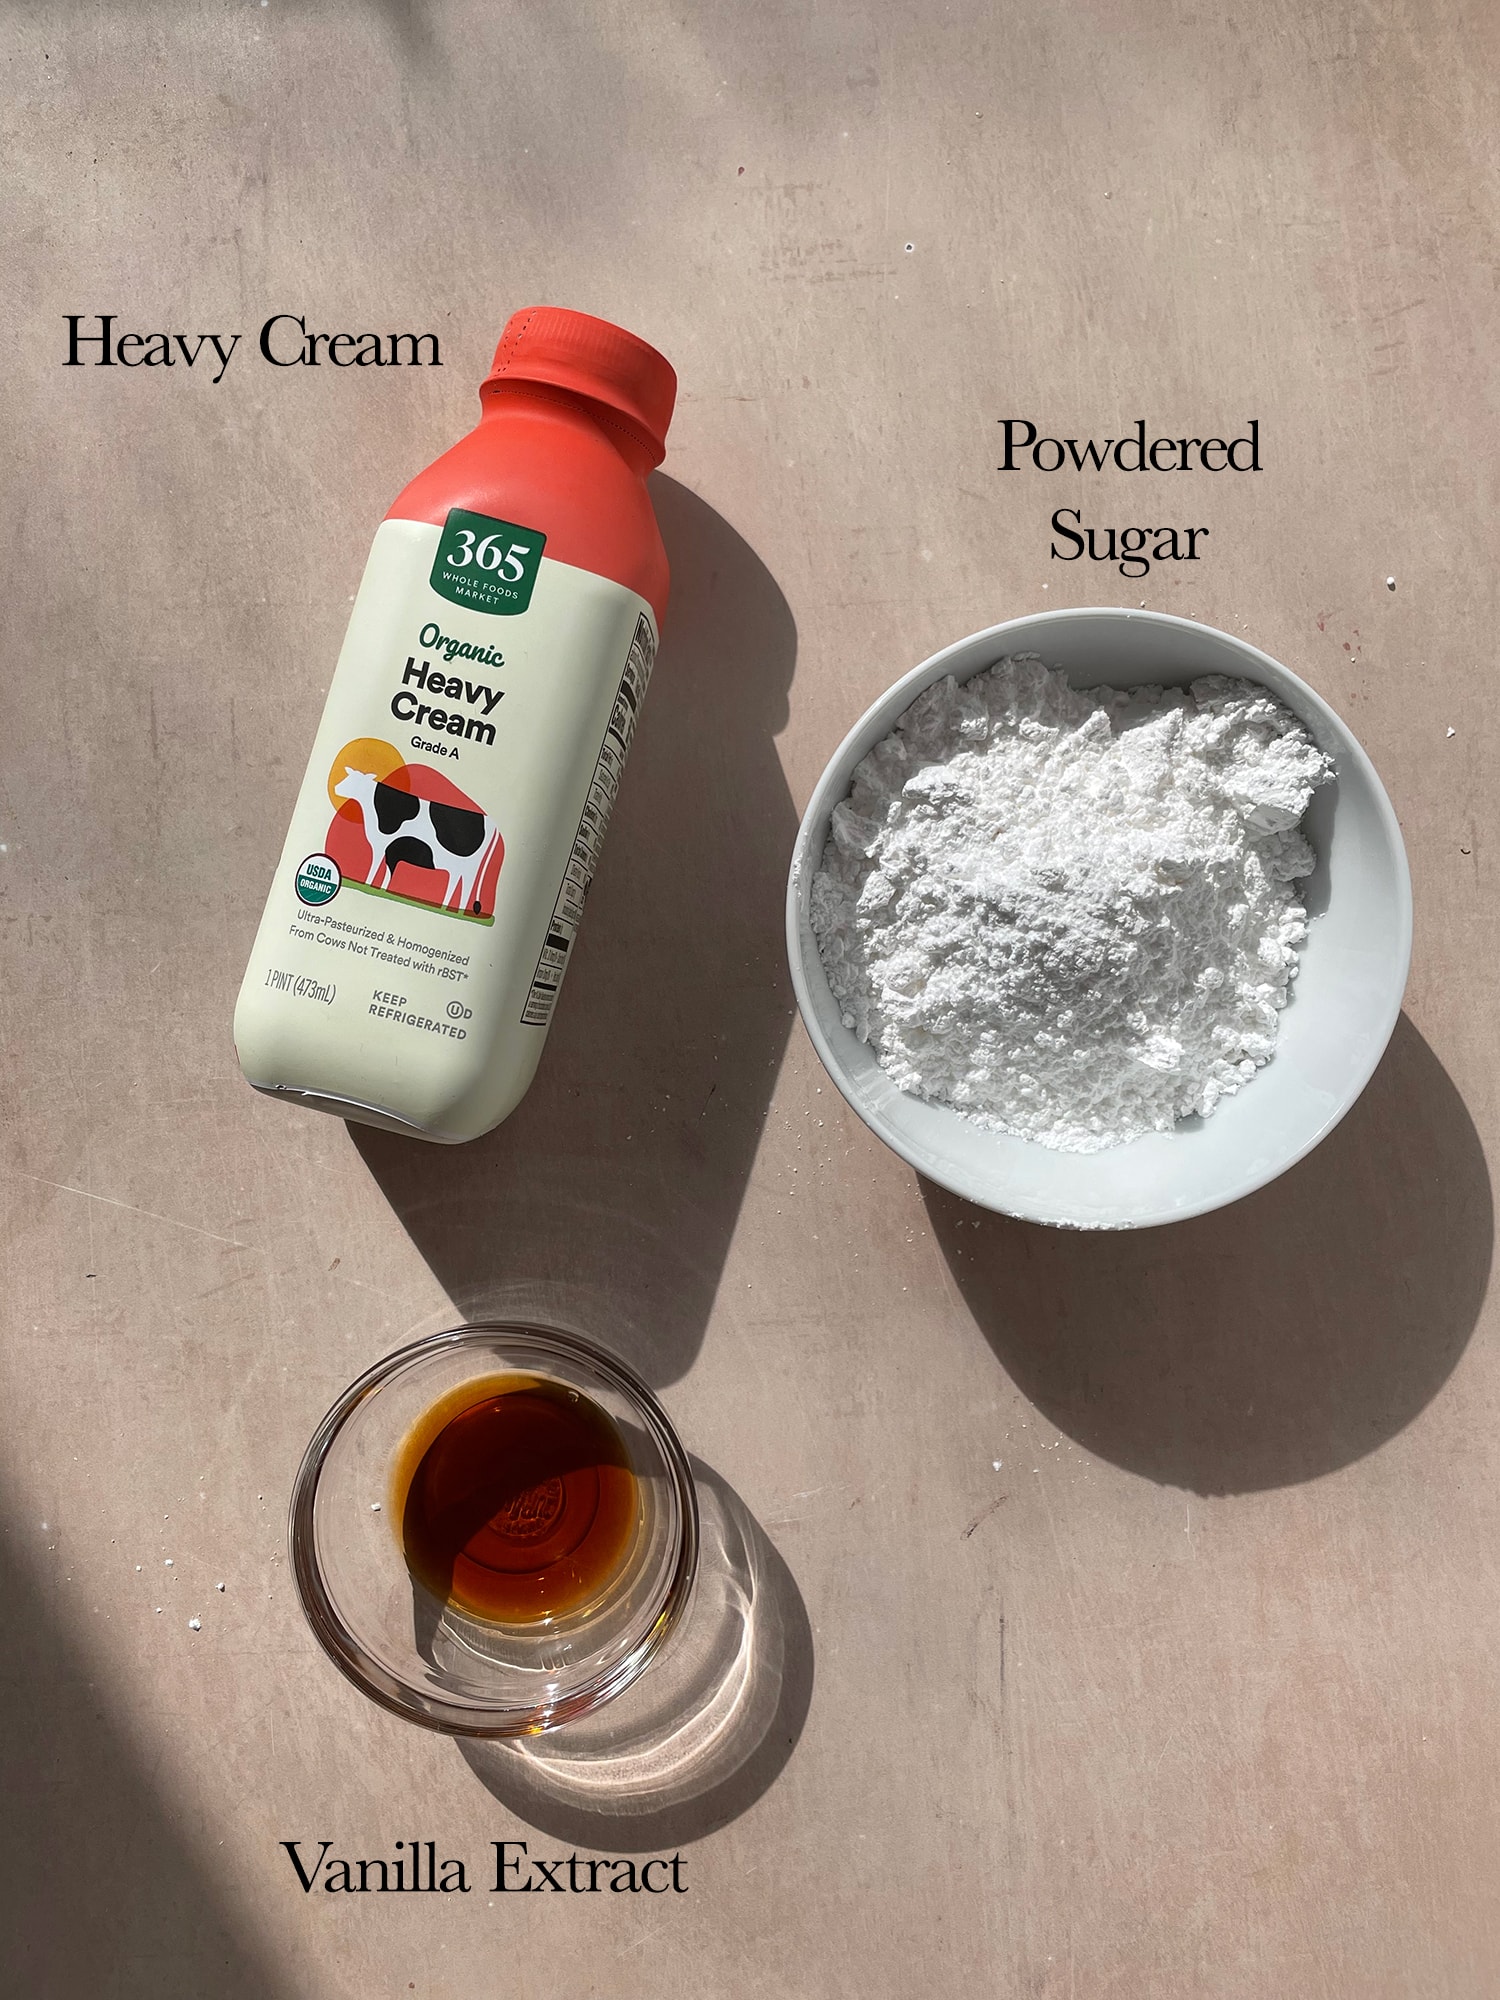 3 Ingredients needed to make sweetened whipped cream. 